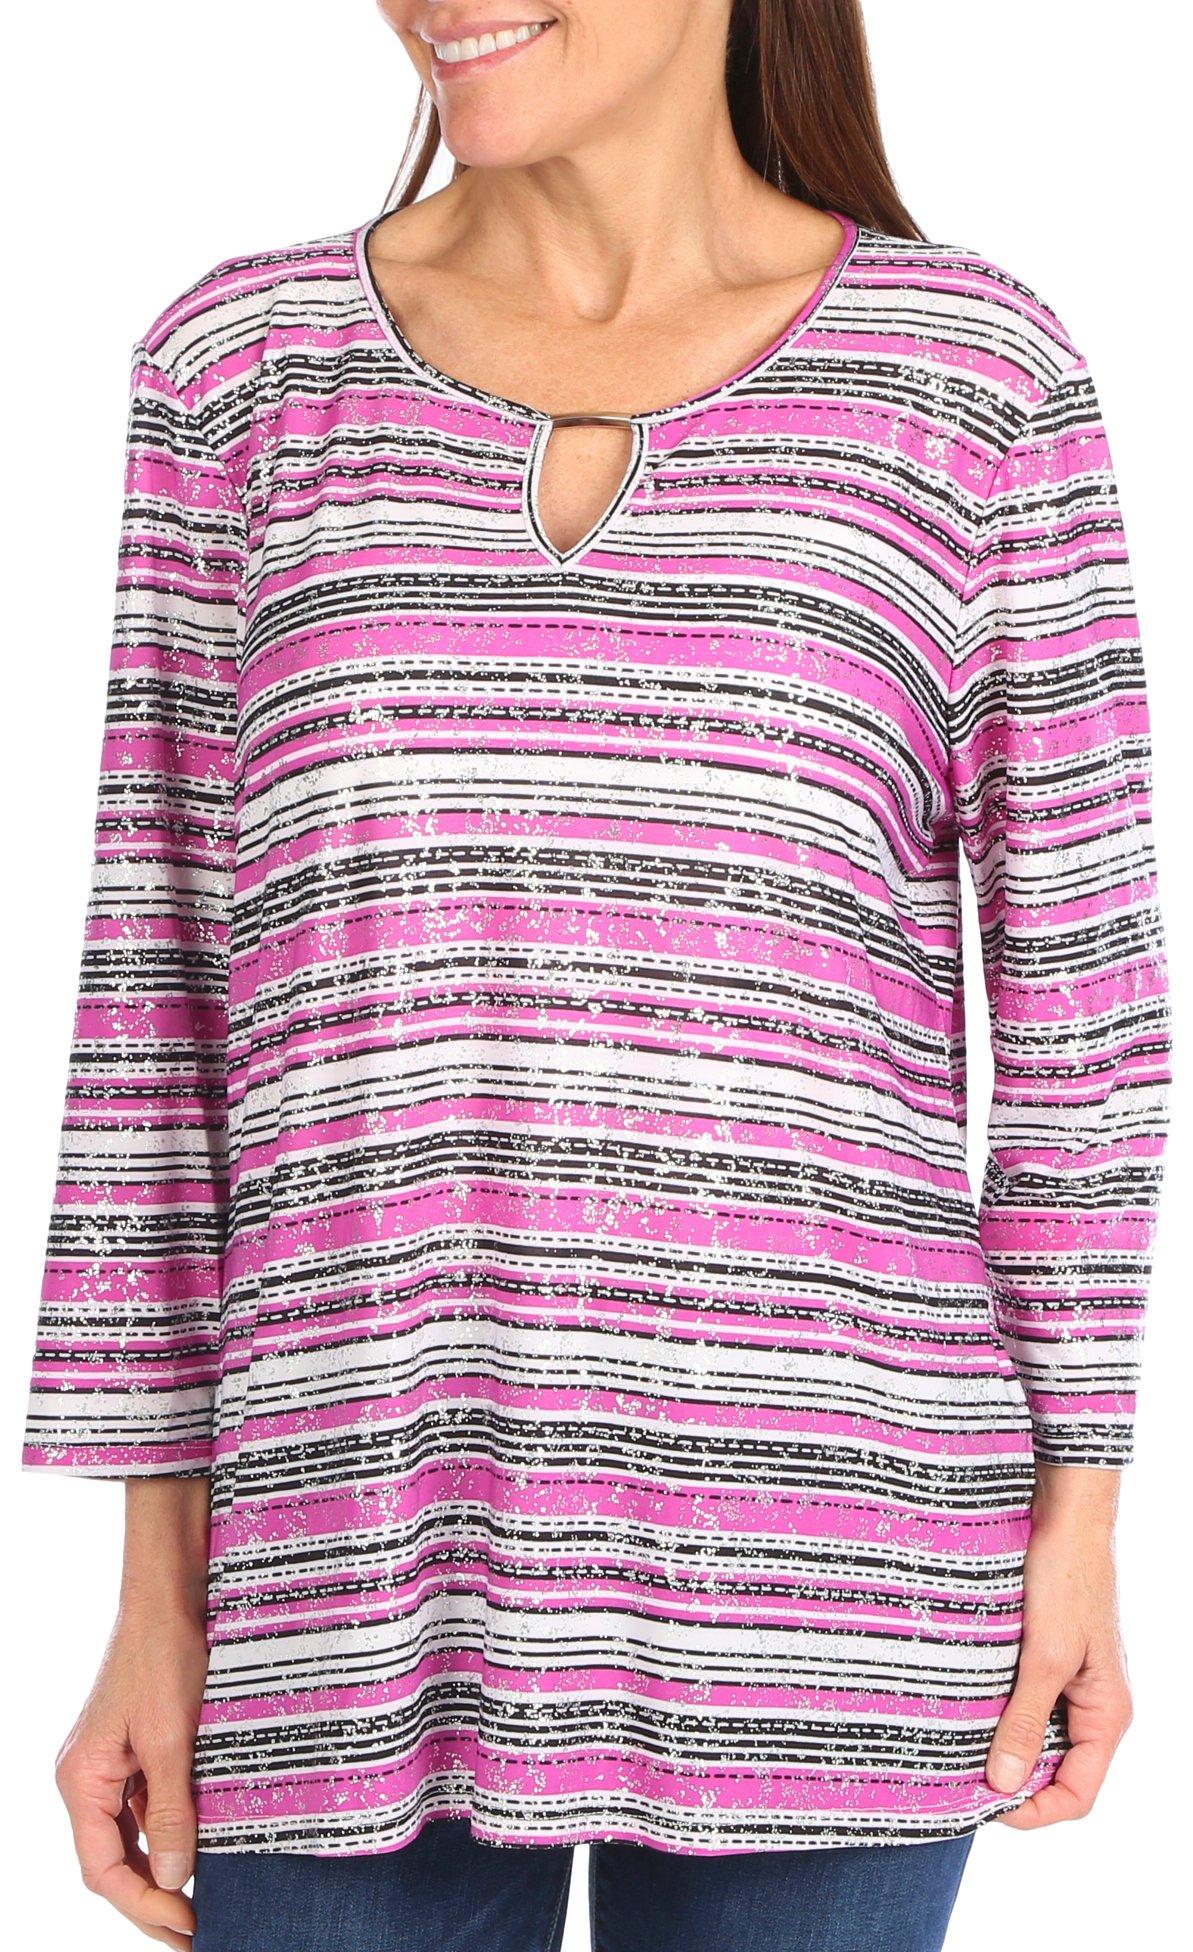 Coral Bay Womens Striped Foil 3/4 Sleeve Top